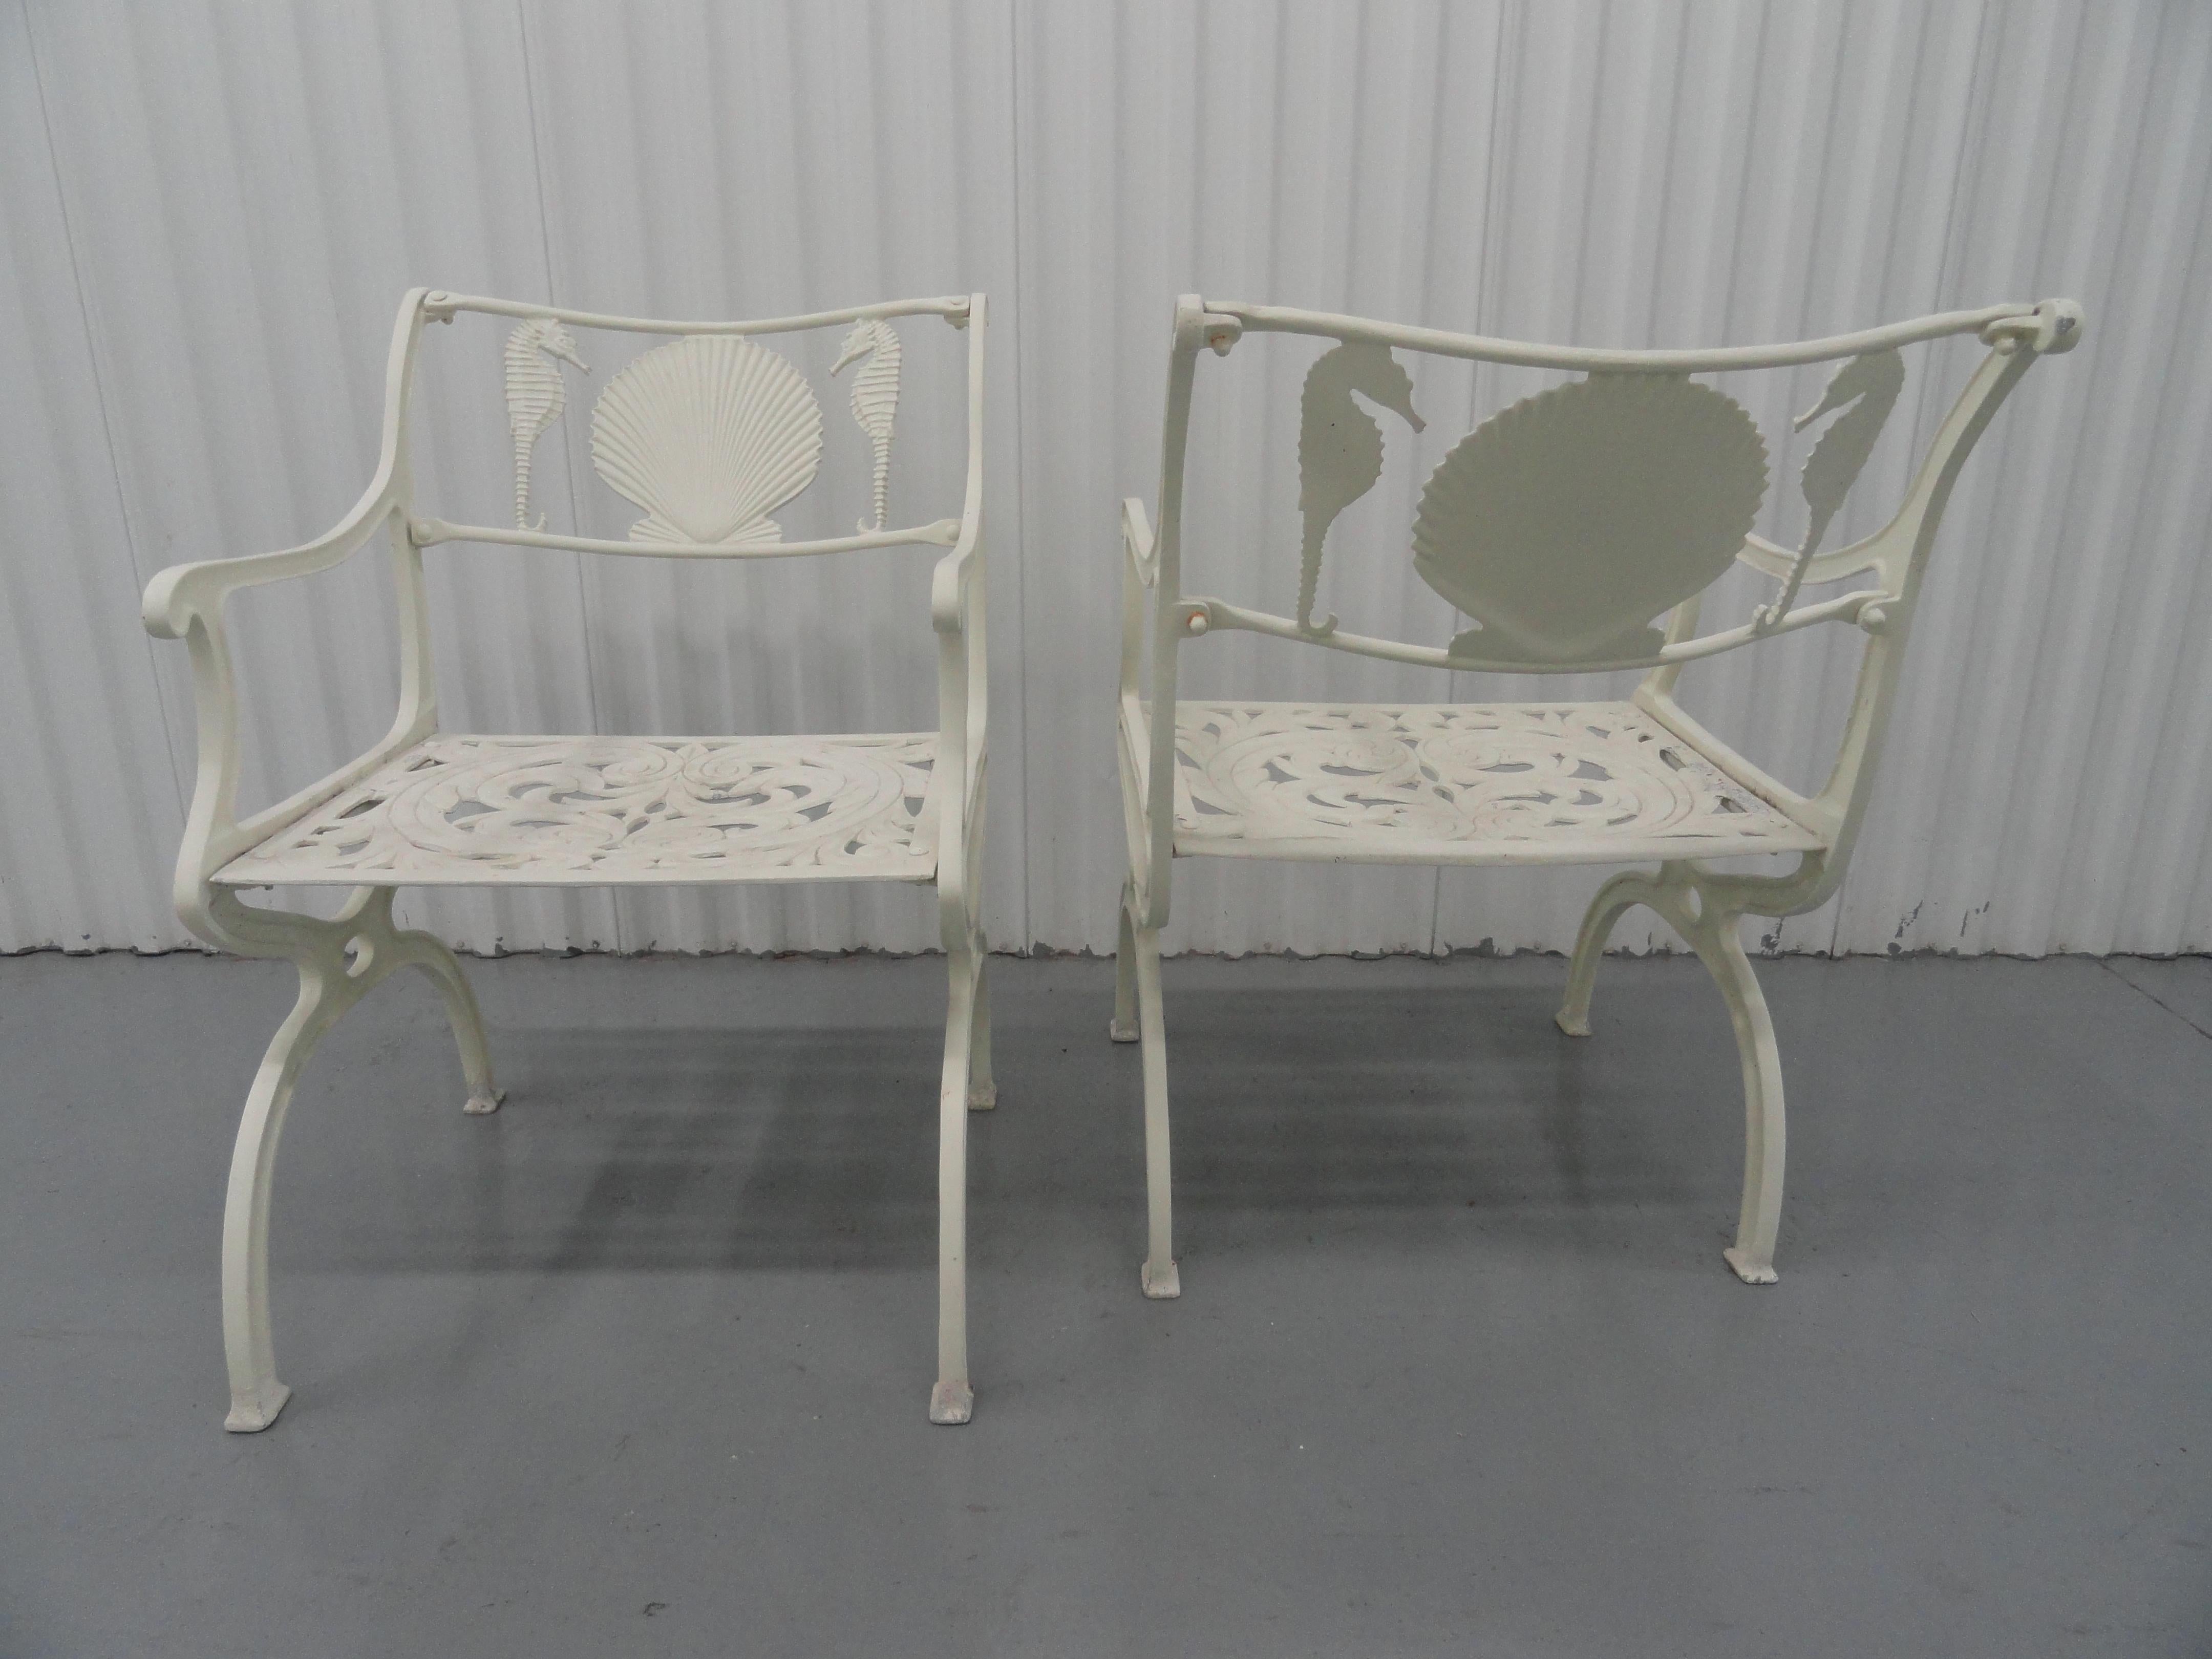 American Pair of Cast Aluminum Garden Chairs with Seahorse and Shell Motif, Molla, 1950s For Sale